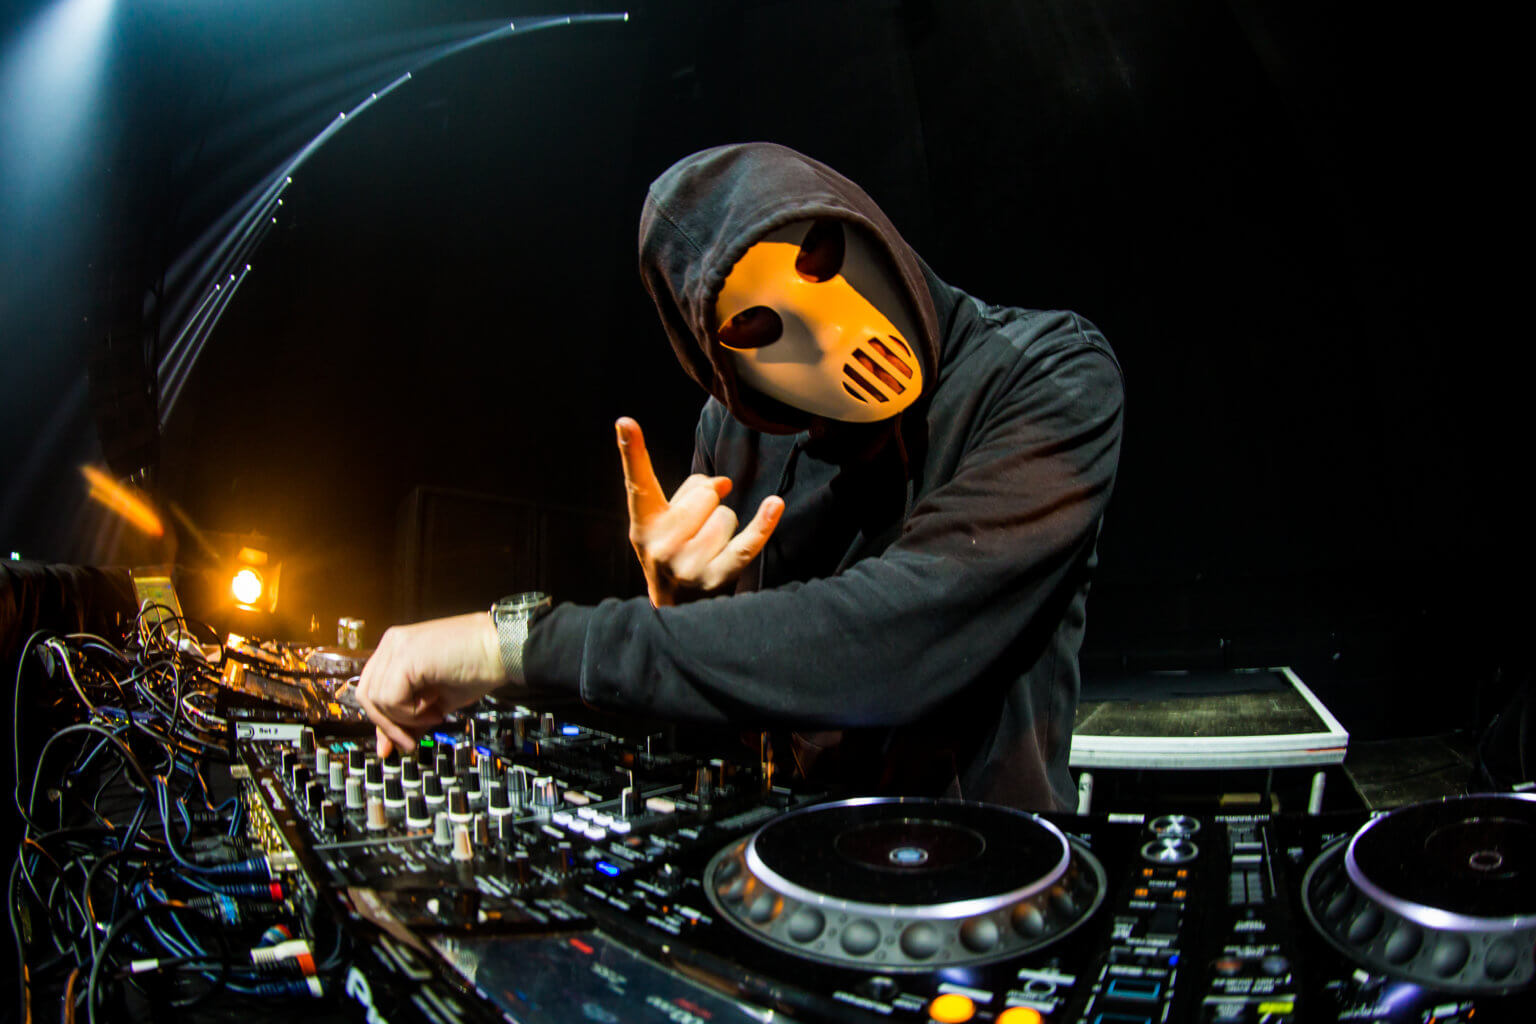 Check the line-up for Angerfist – Diabolic Dice